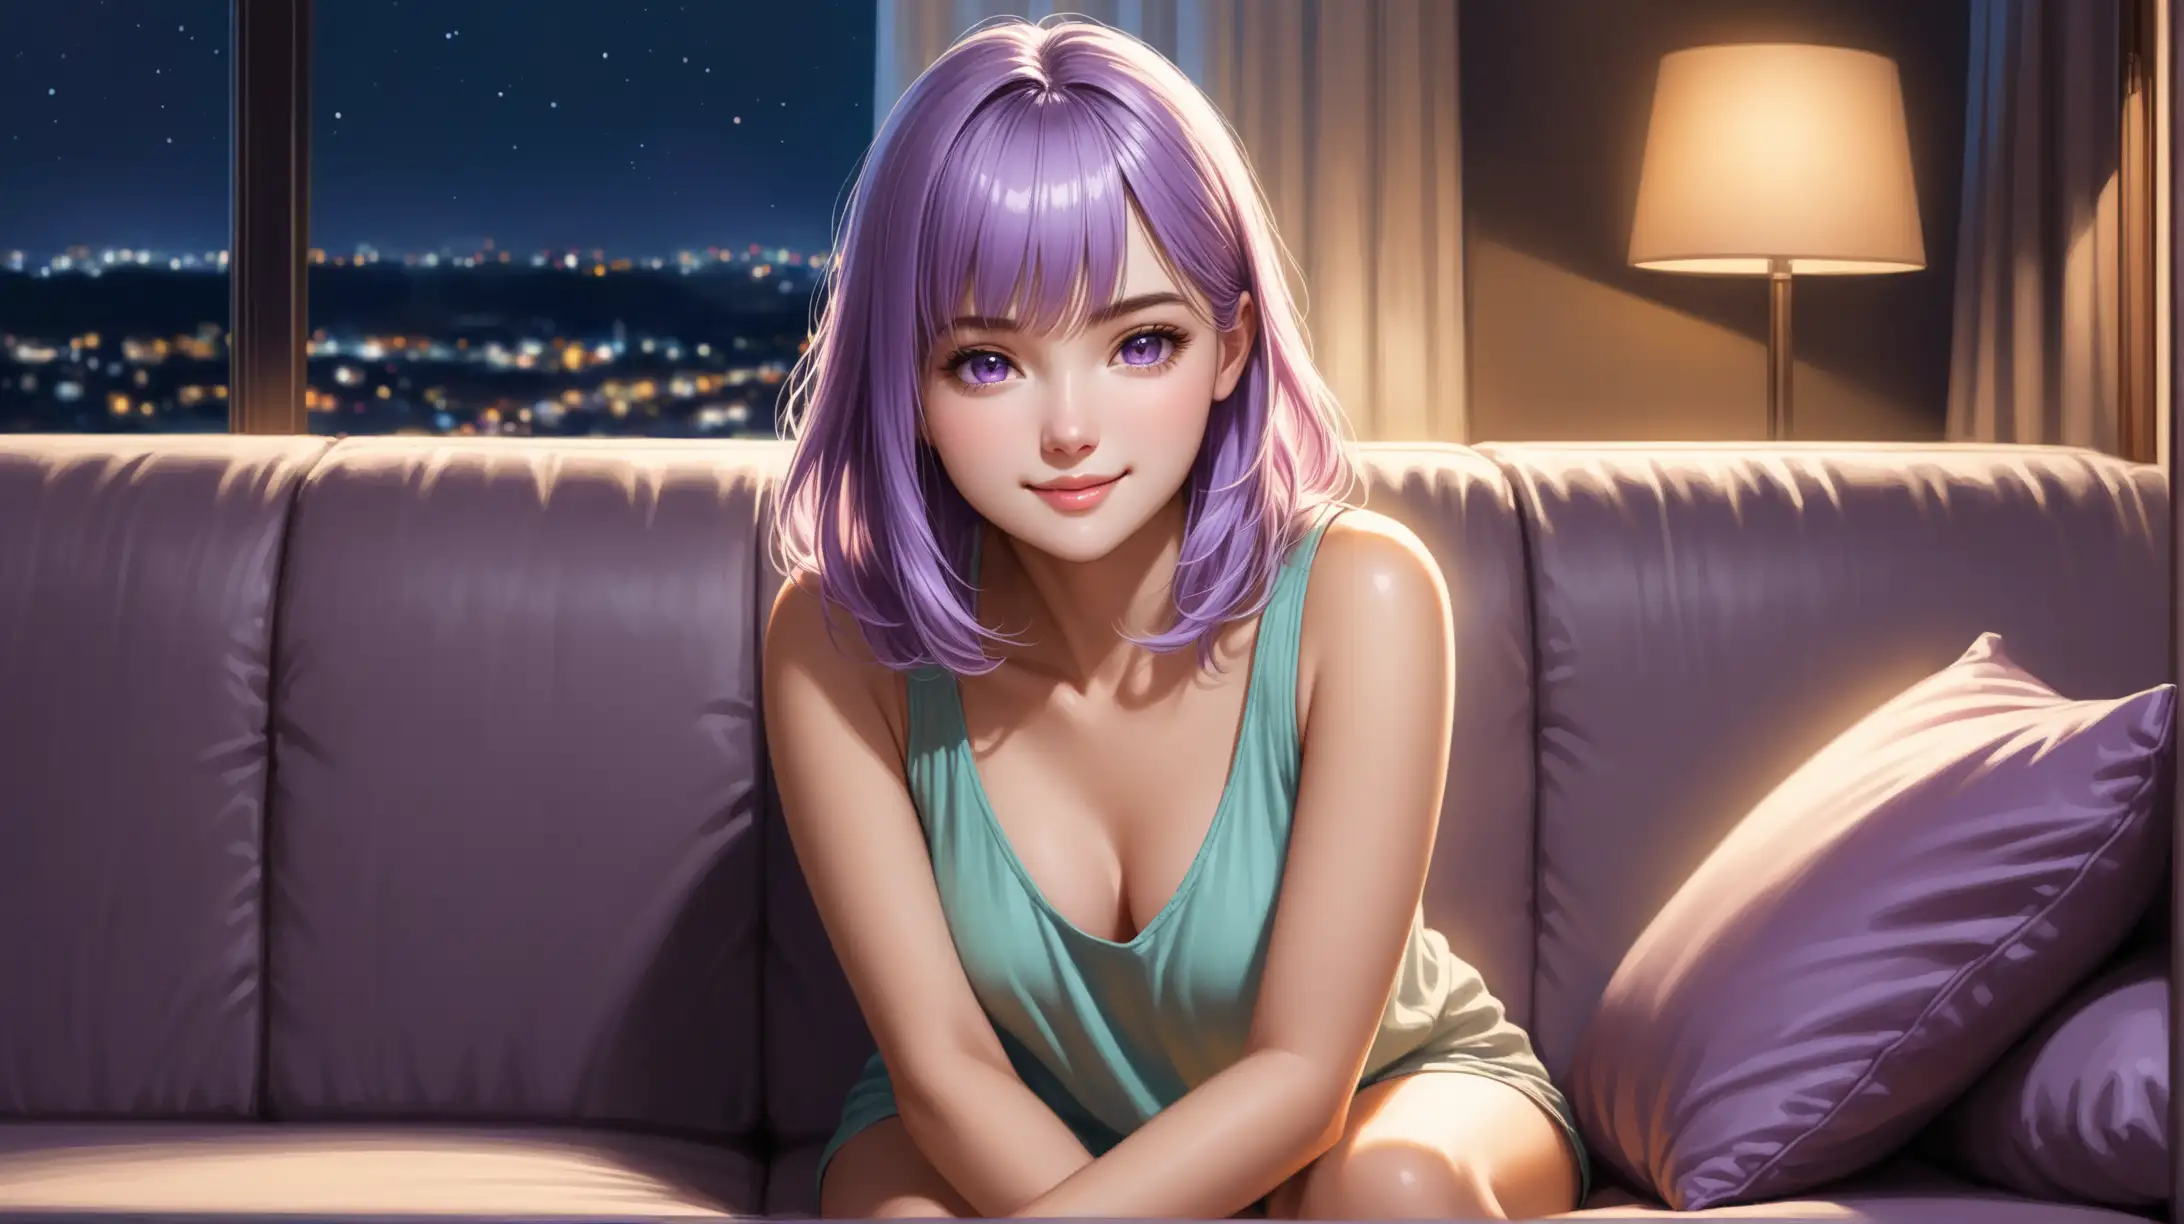 Draw a woman, shoulder length light purple hair, messy bangs framing her face, light purple eyes, petite figure, high quality, realistic, accurate, detailed, long shot, indoors, sitting on sofa, night lighting, seductive pose, casual summer outfit, smiling at the viewer